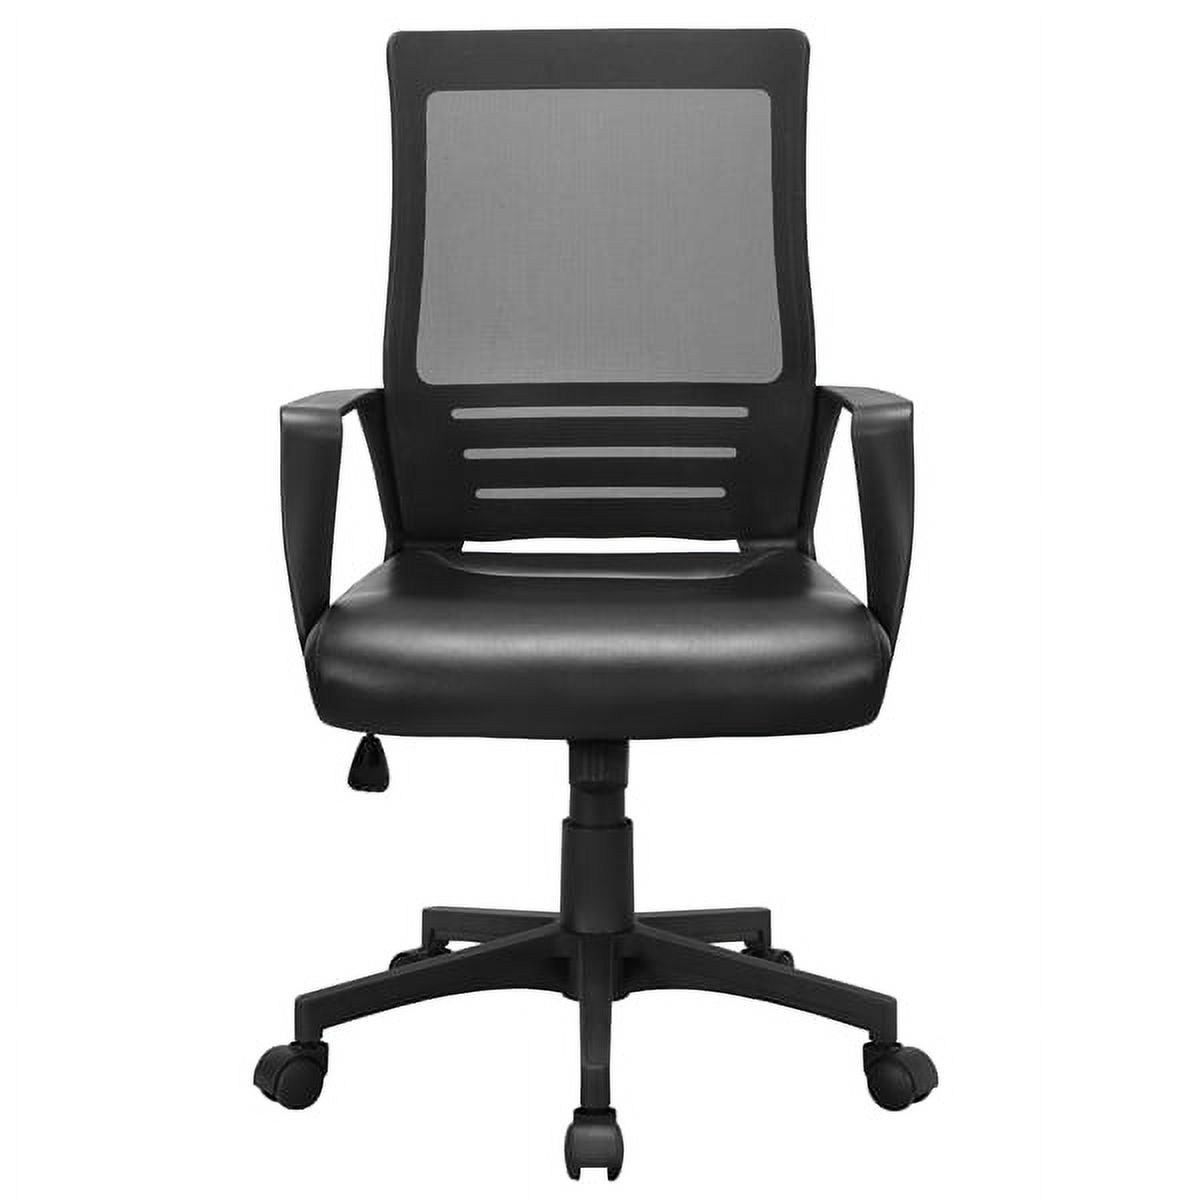 Smile Mart Adjustable Midback Ergonomic Mesh Office Chair with Lumbar Support, Black Seat - image 1 of 19